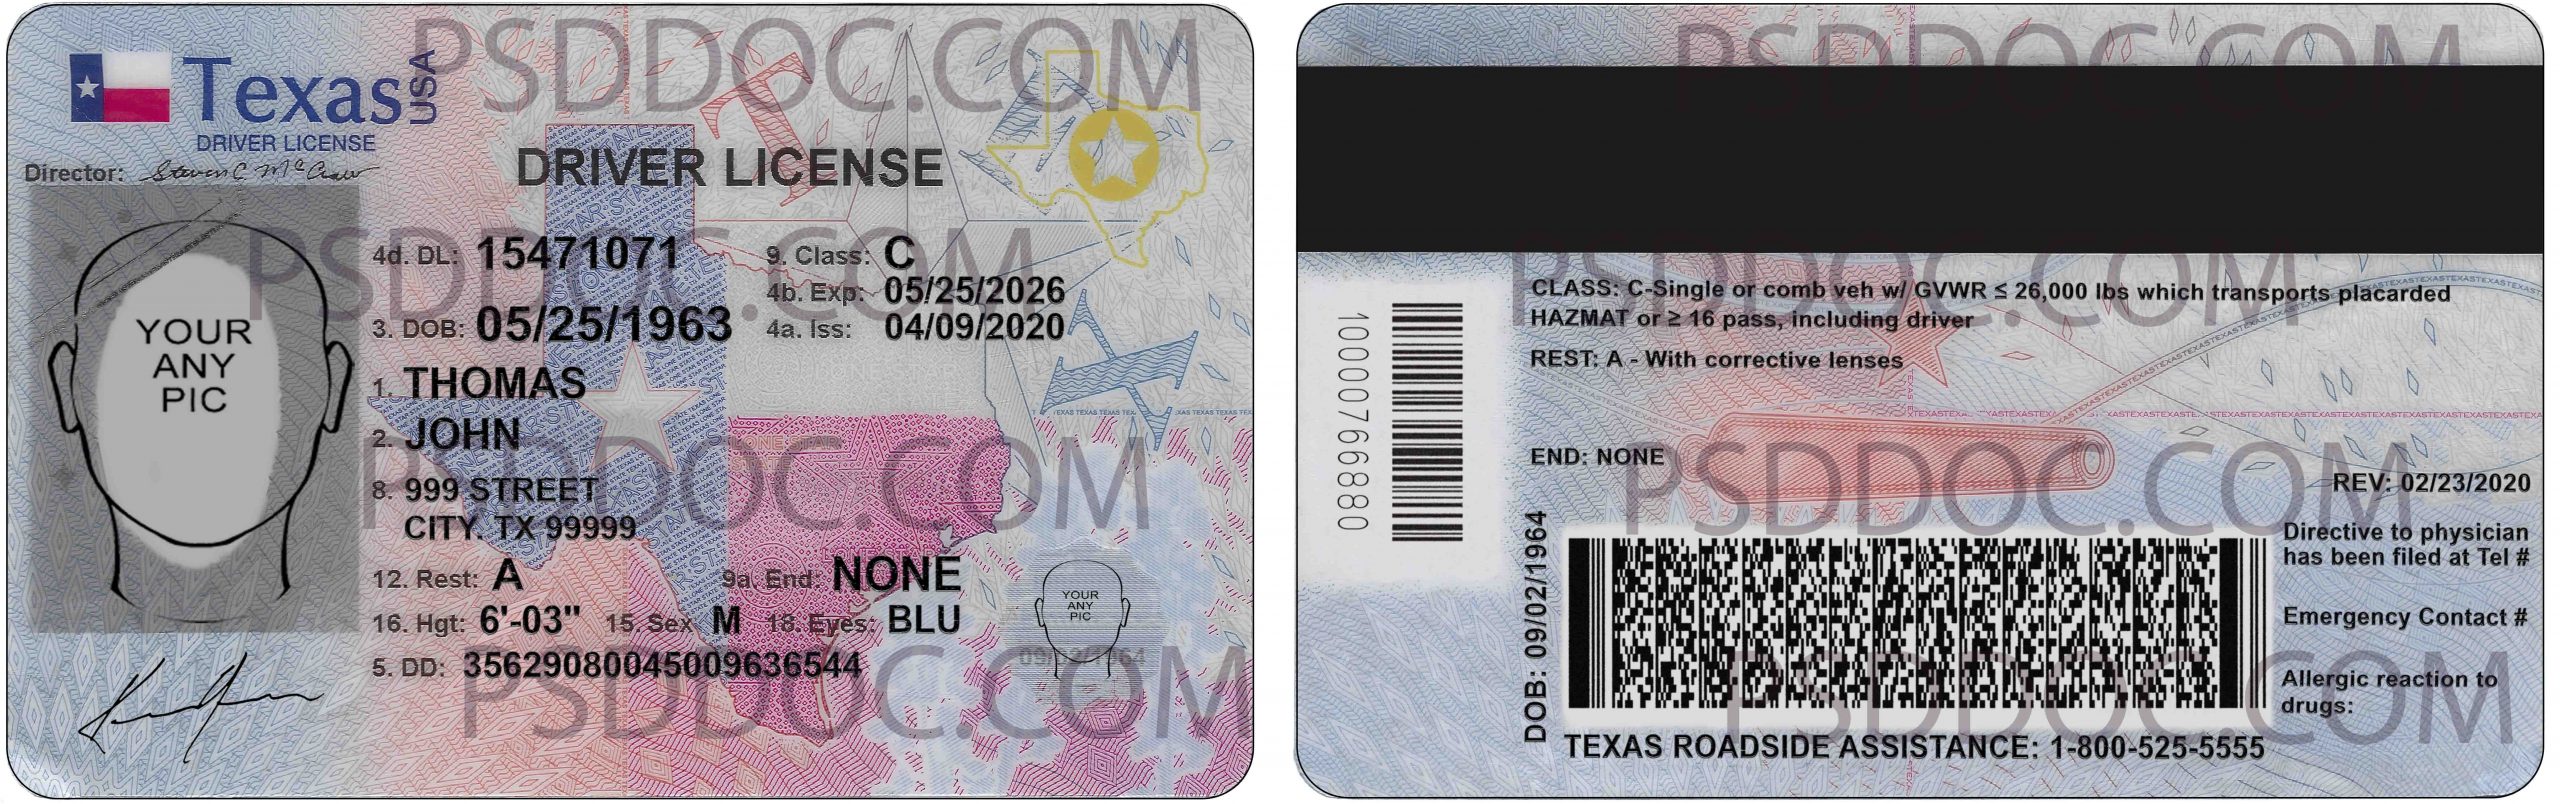 usa-texas-driver-license-front-back-sides-new-psd-store